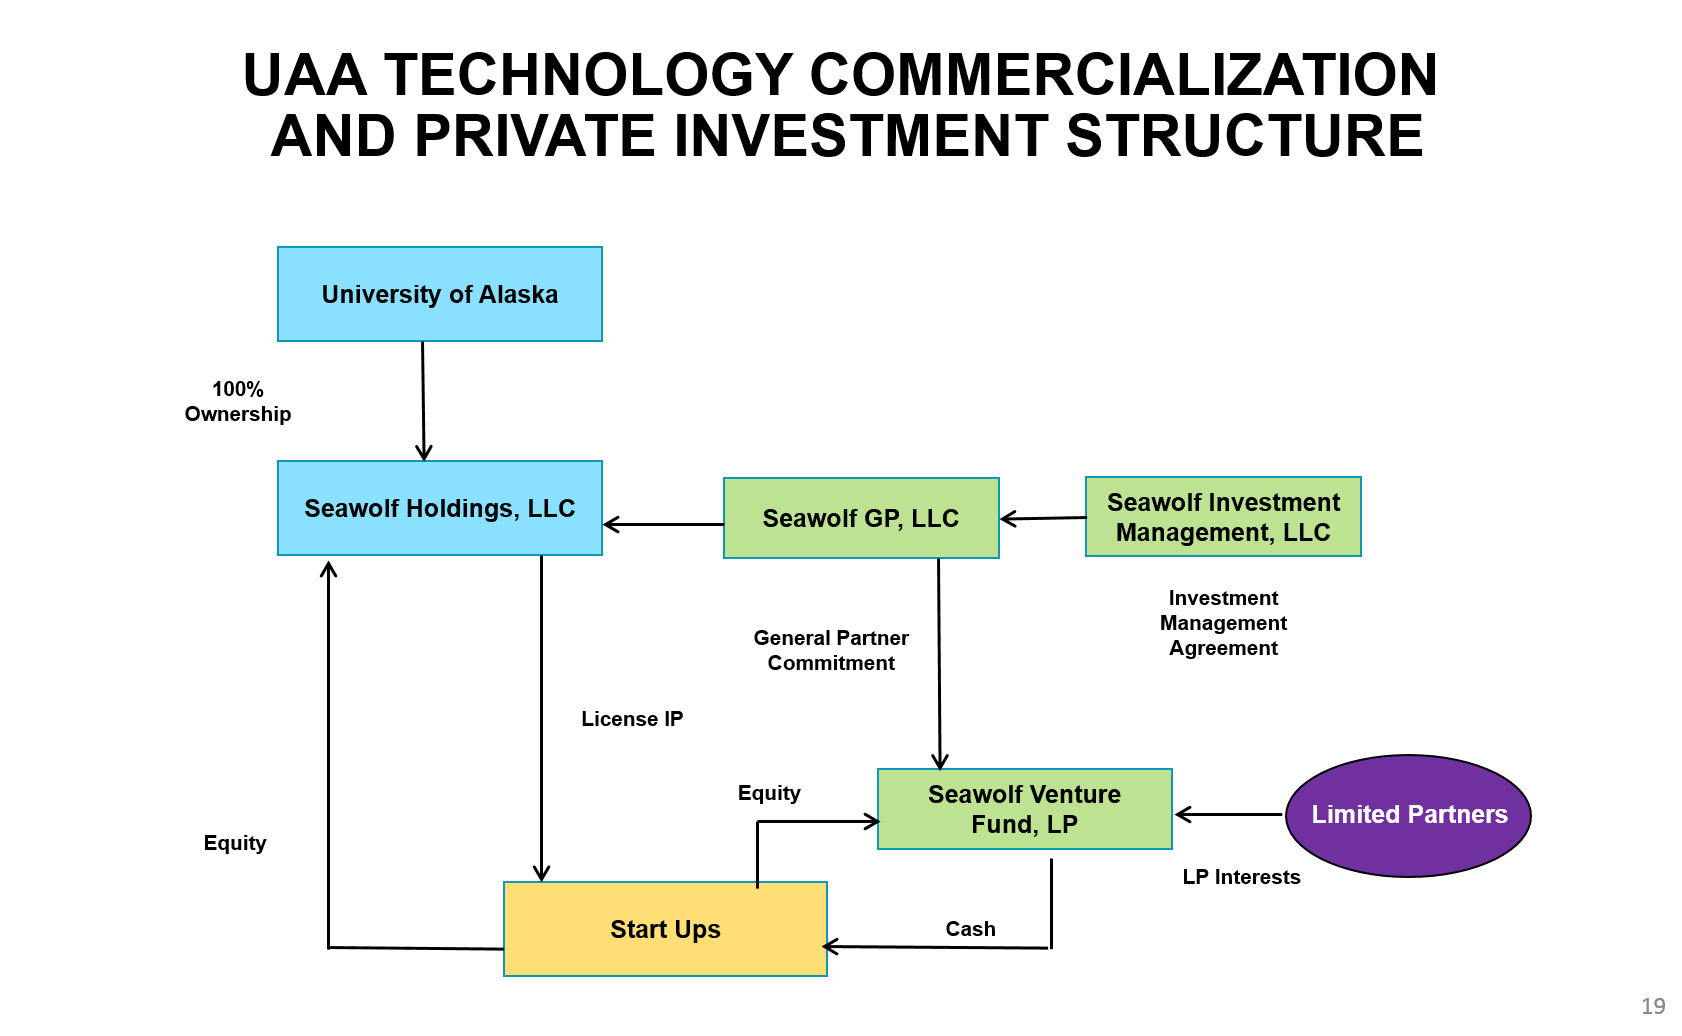 UAA Technology Commercialization and Private Investment Structure